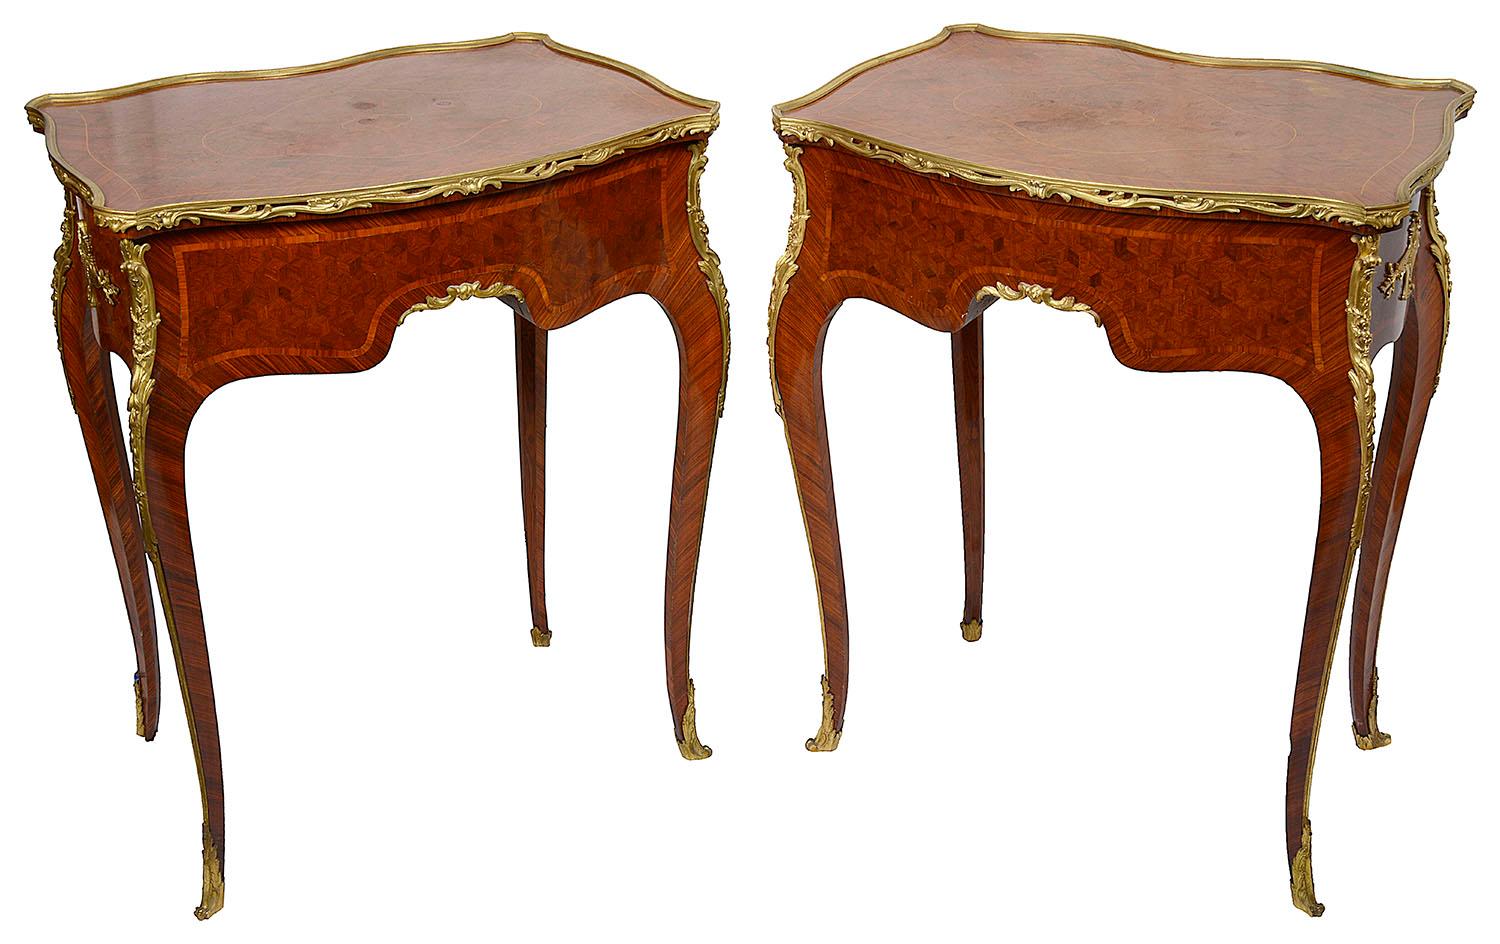 A fine quality pair of late 19th century French parquetry inlaid side tables, each with wonderful parquetry inlaid decoration, classical Rococo style gilded ormolu mounts, five drawers with shell like handles, free standing and raised on elegant